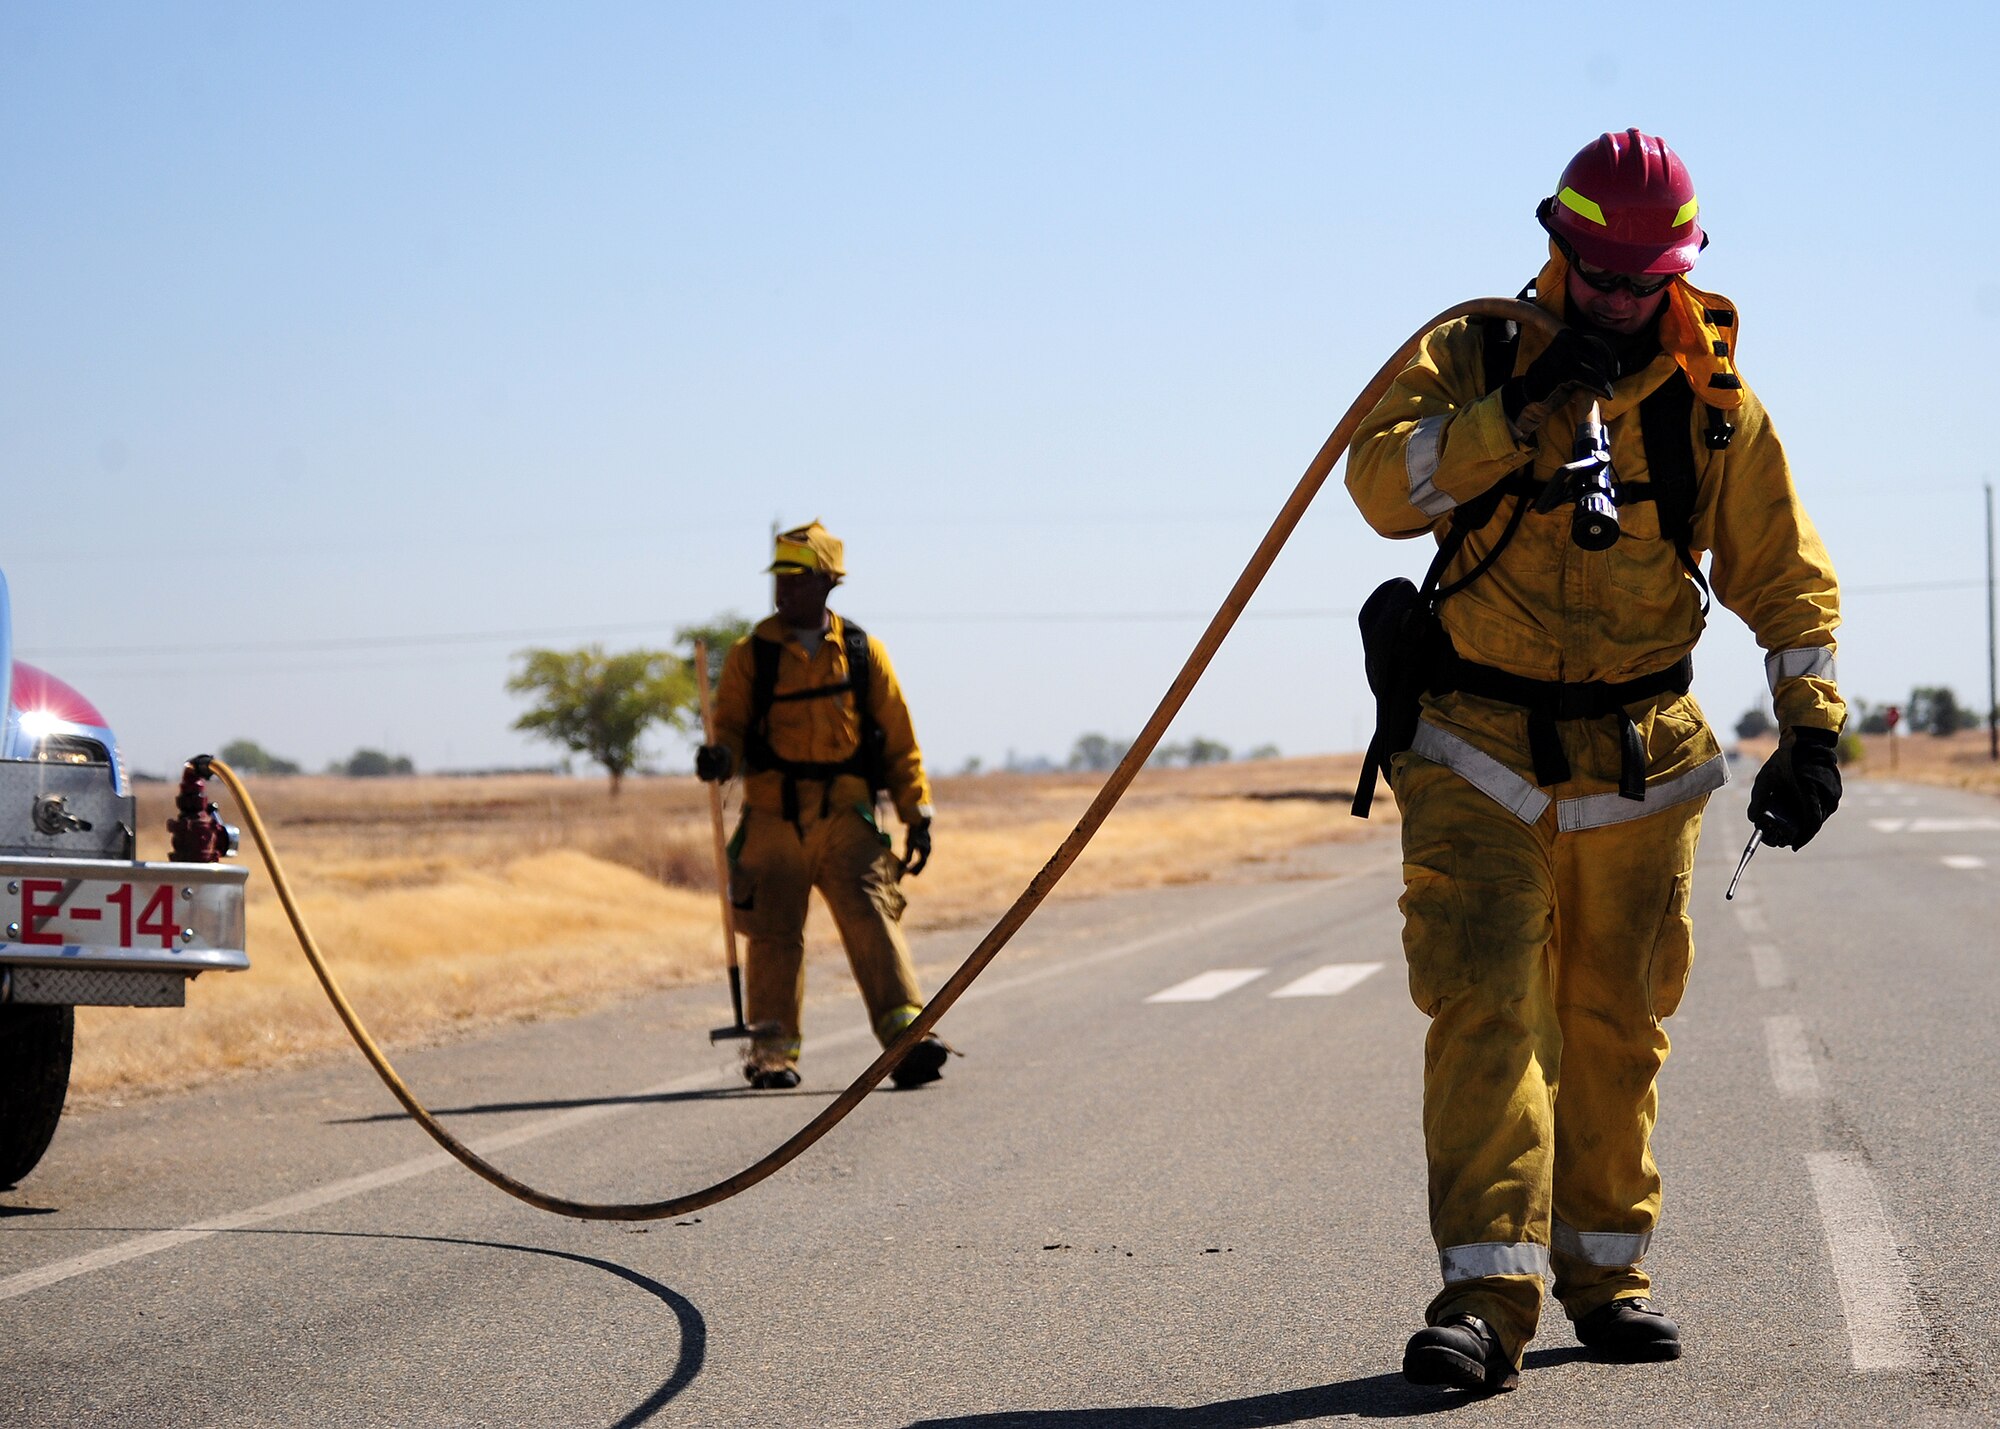 U.S. Air Force firefighters return from combating a grass fire at Beale Air Force Base, Calif., Sept. 13, 2012. More than 14 firefighters and 7 vehicles responded to the blaze. (U.S. Air Force photo by Senior Airman Shawn Nickel/Released)